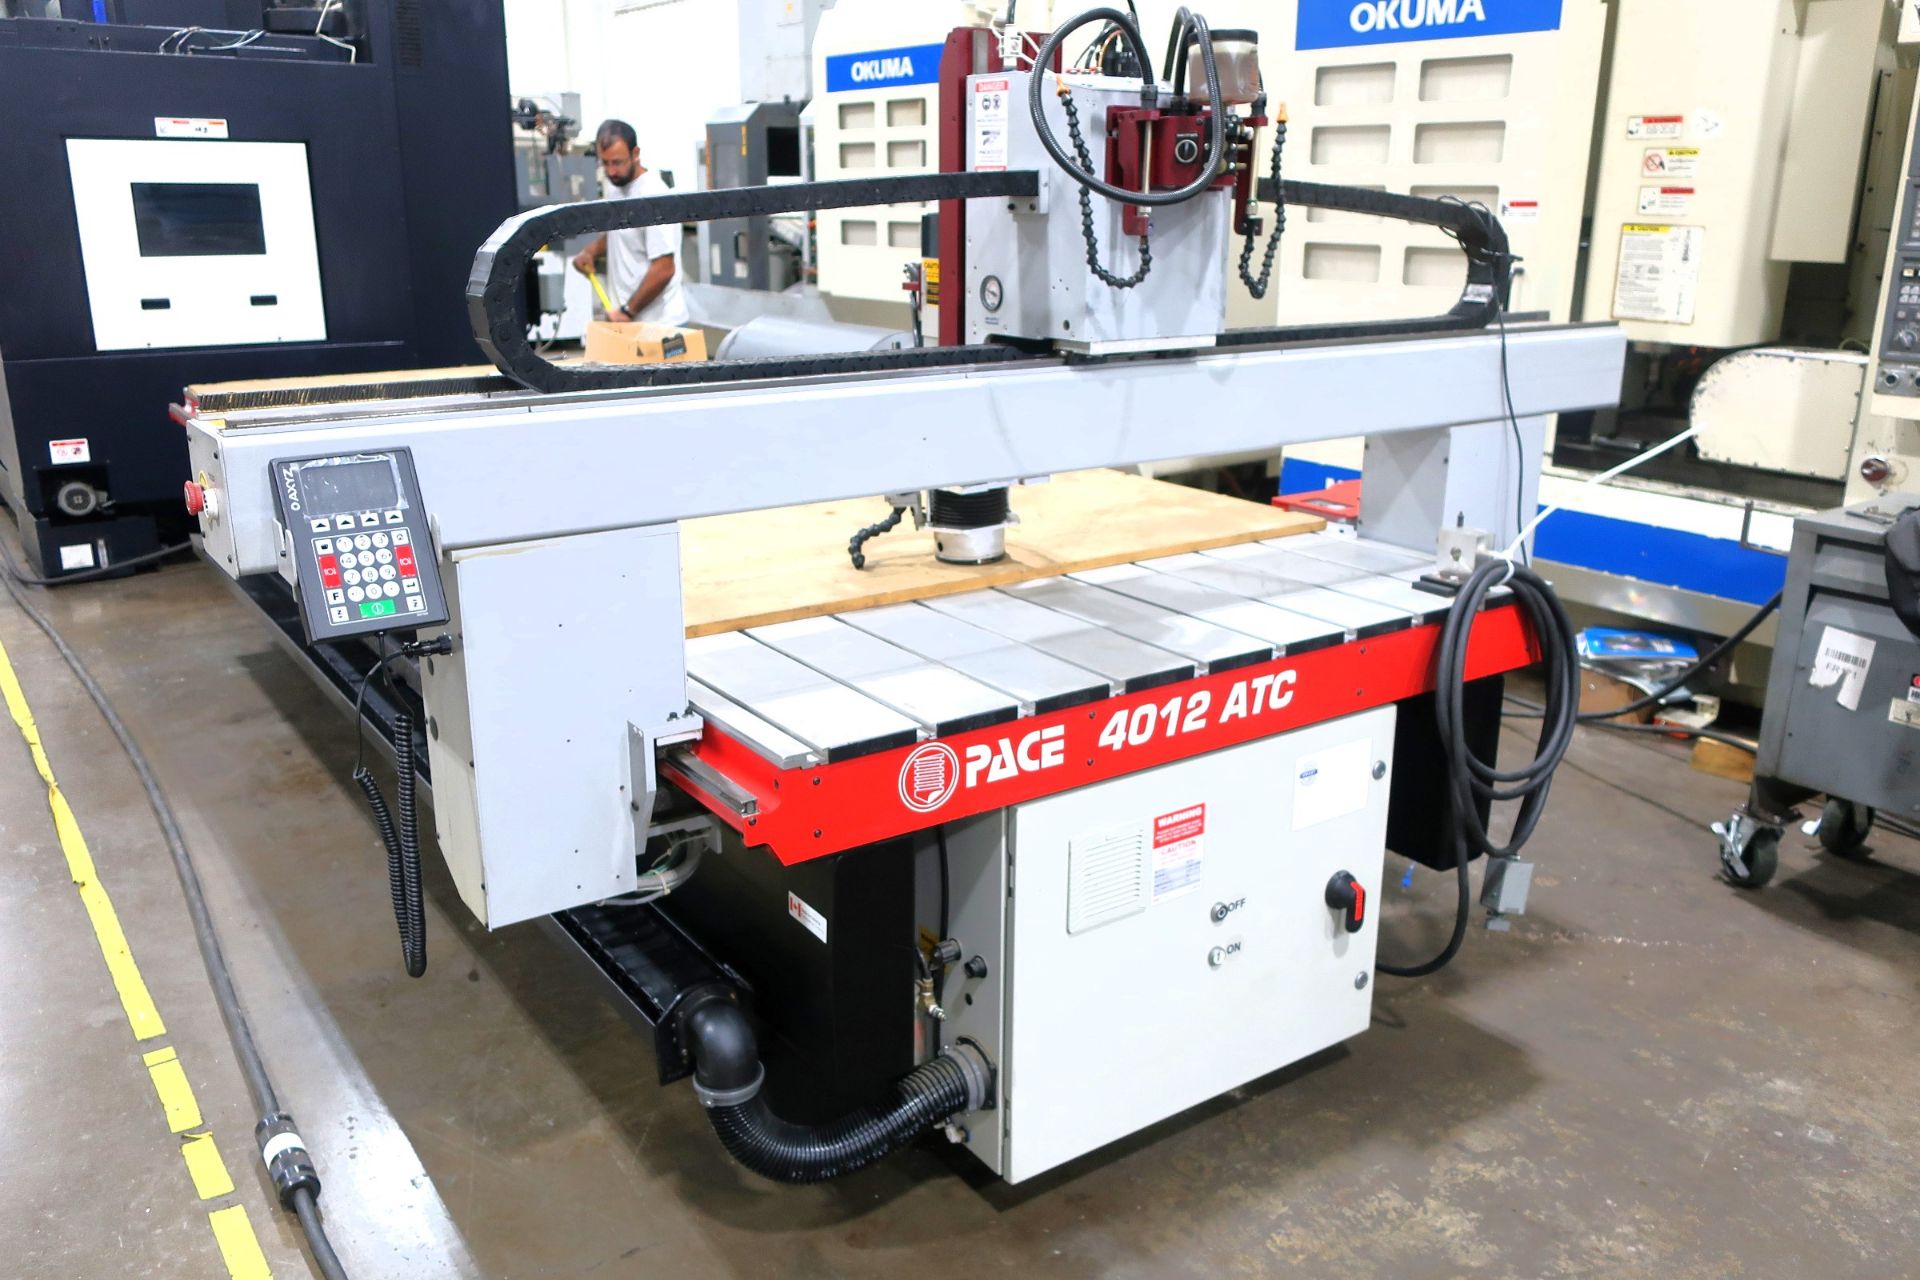 5'X12' AXYZ PACER 4012 ATC CNC ROUTER, New 2015 - Image 2 of 11